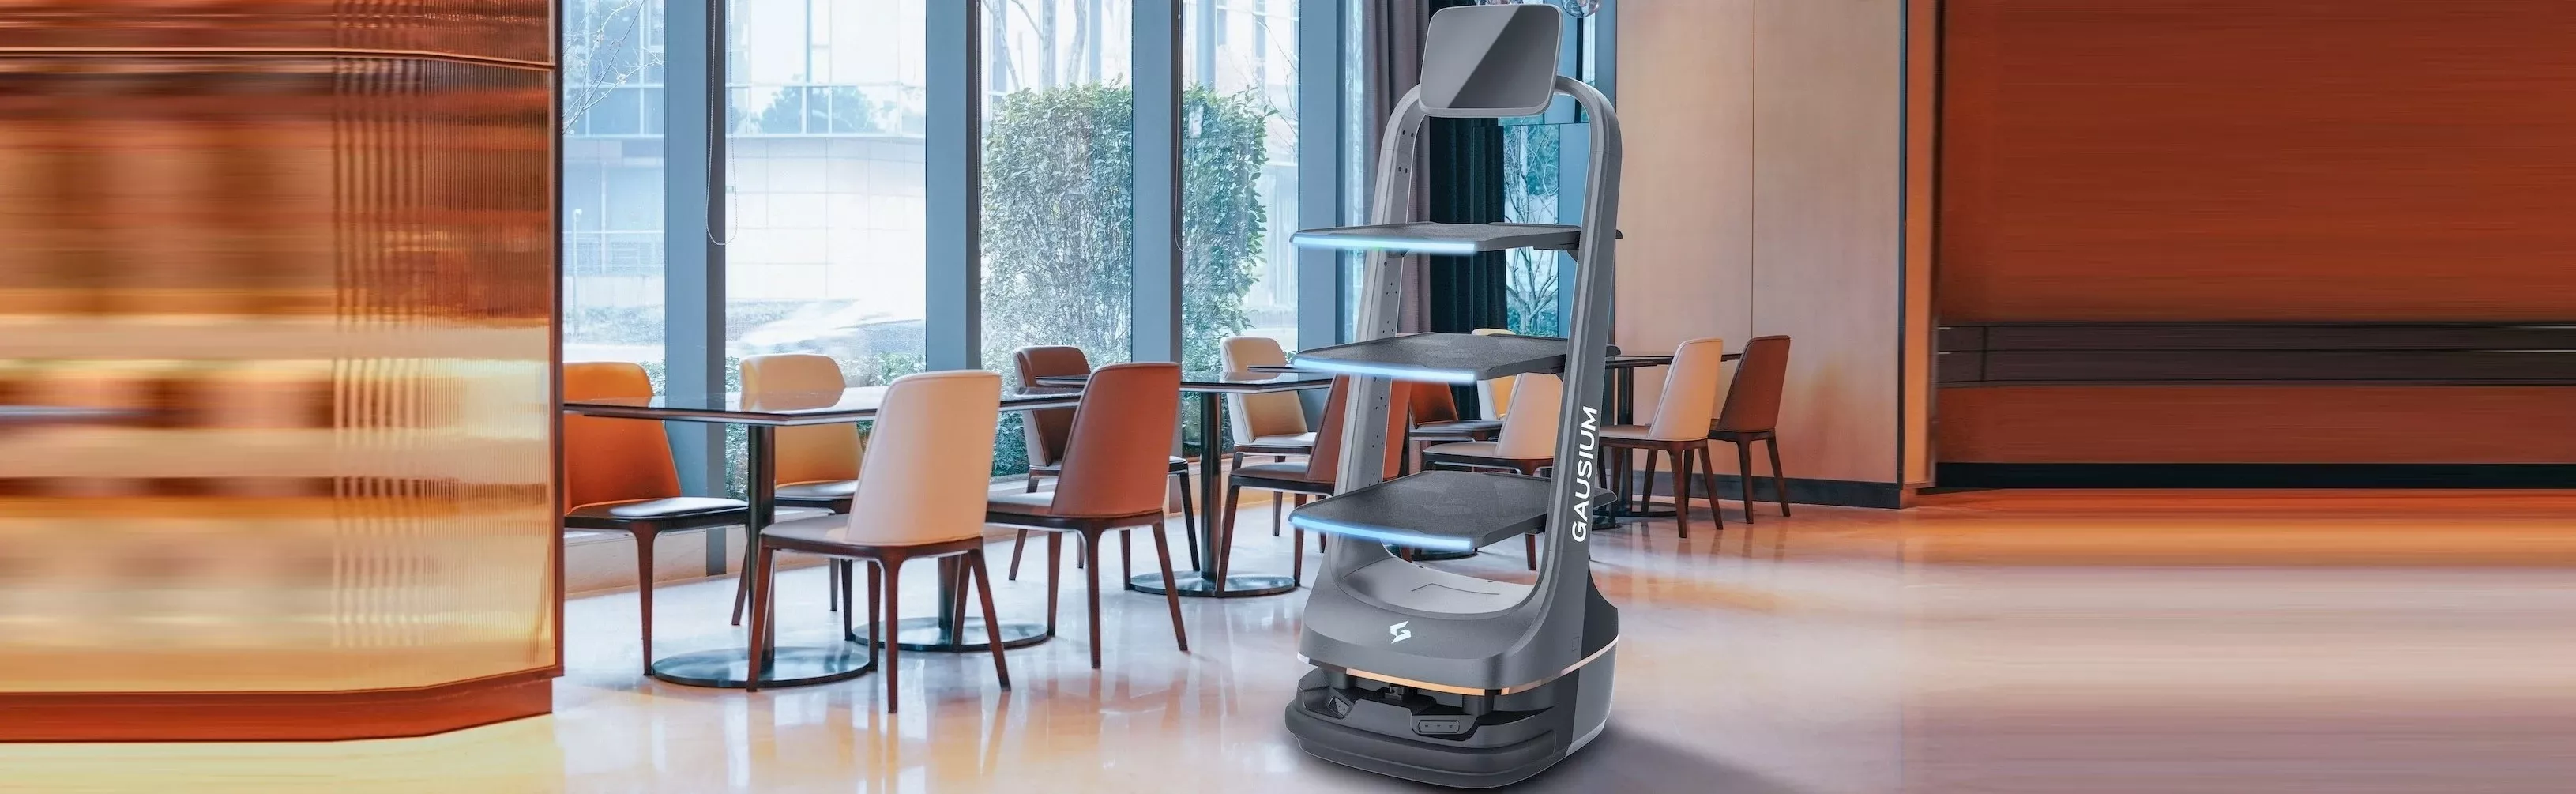 Robotic Delivery Solution for Food and Beverage Service Industry